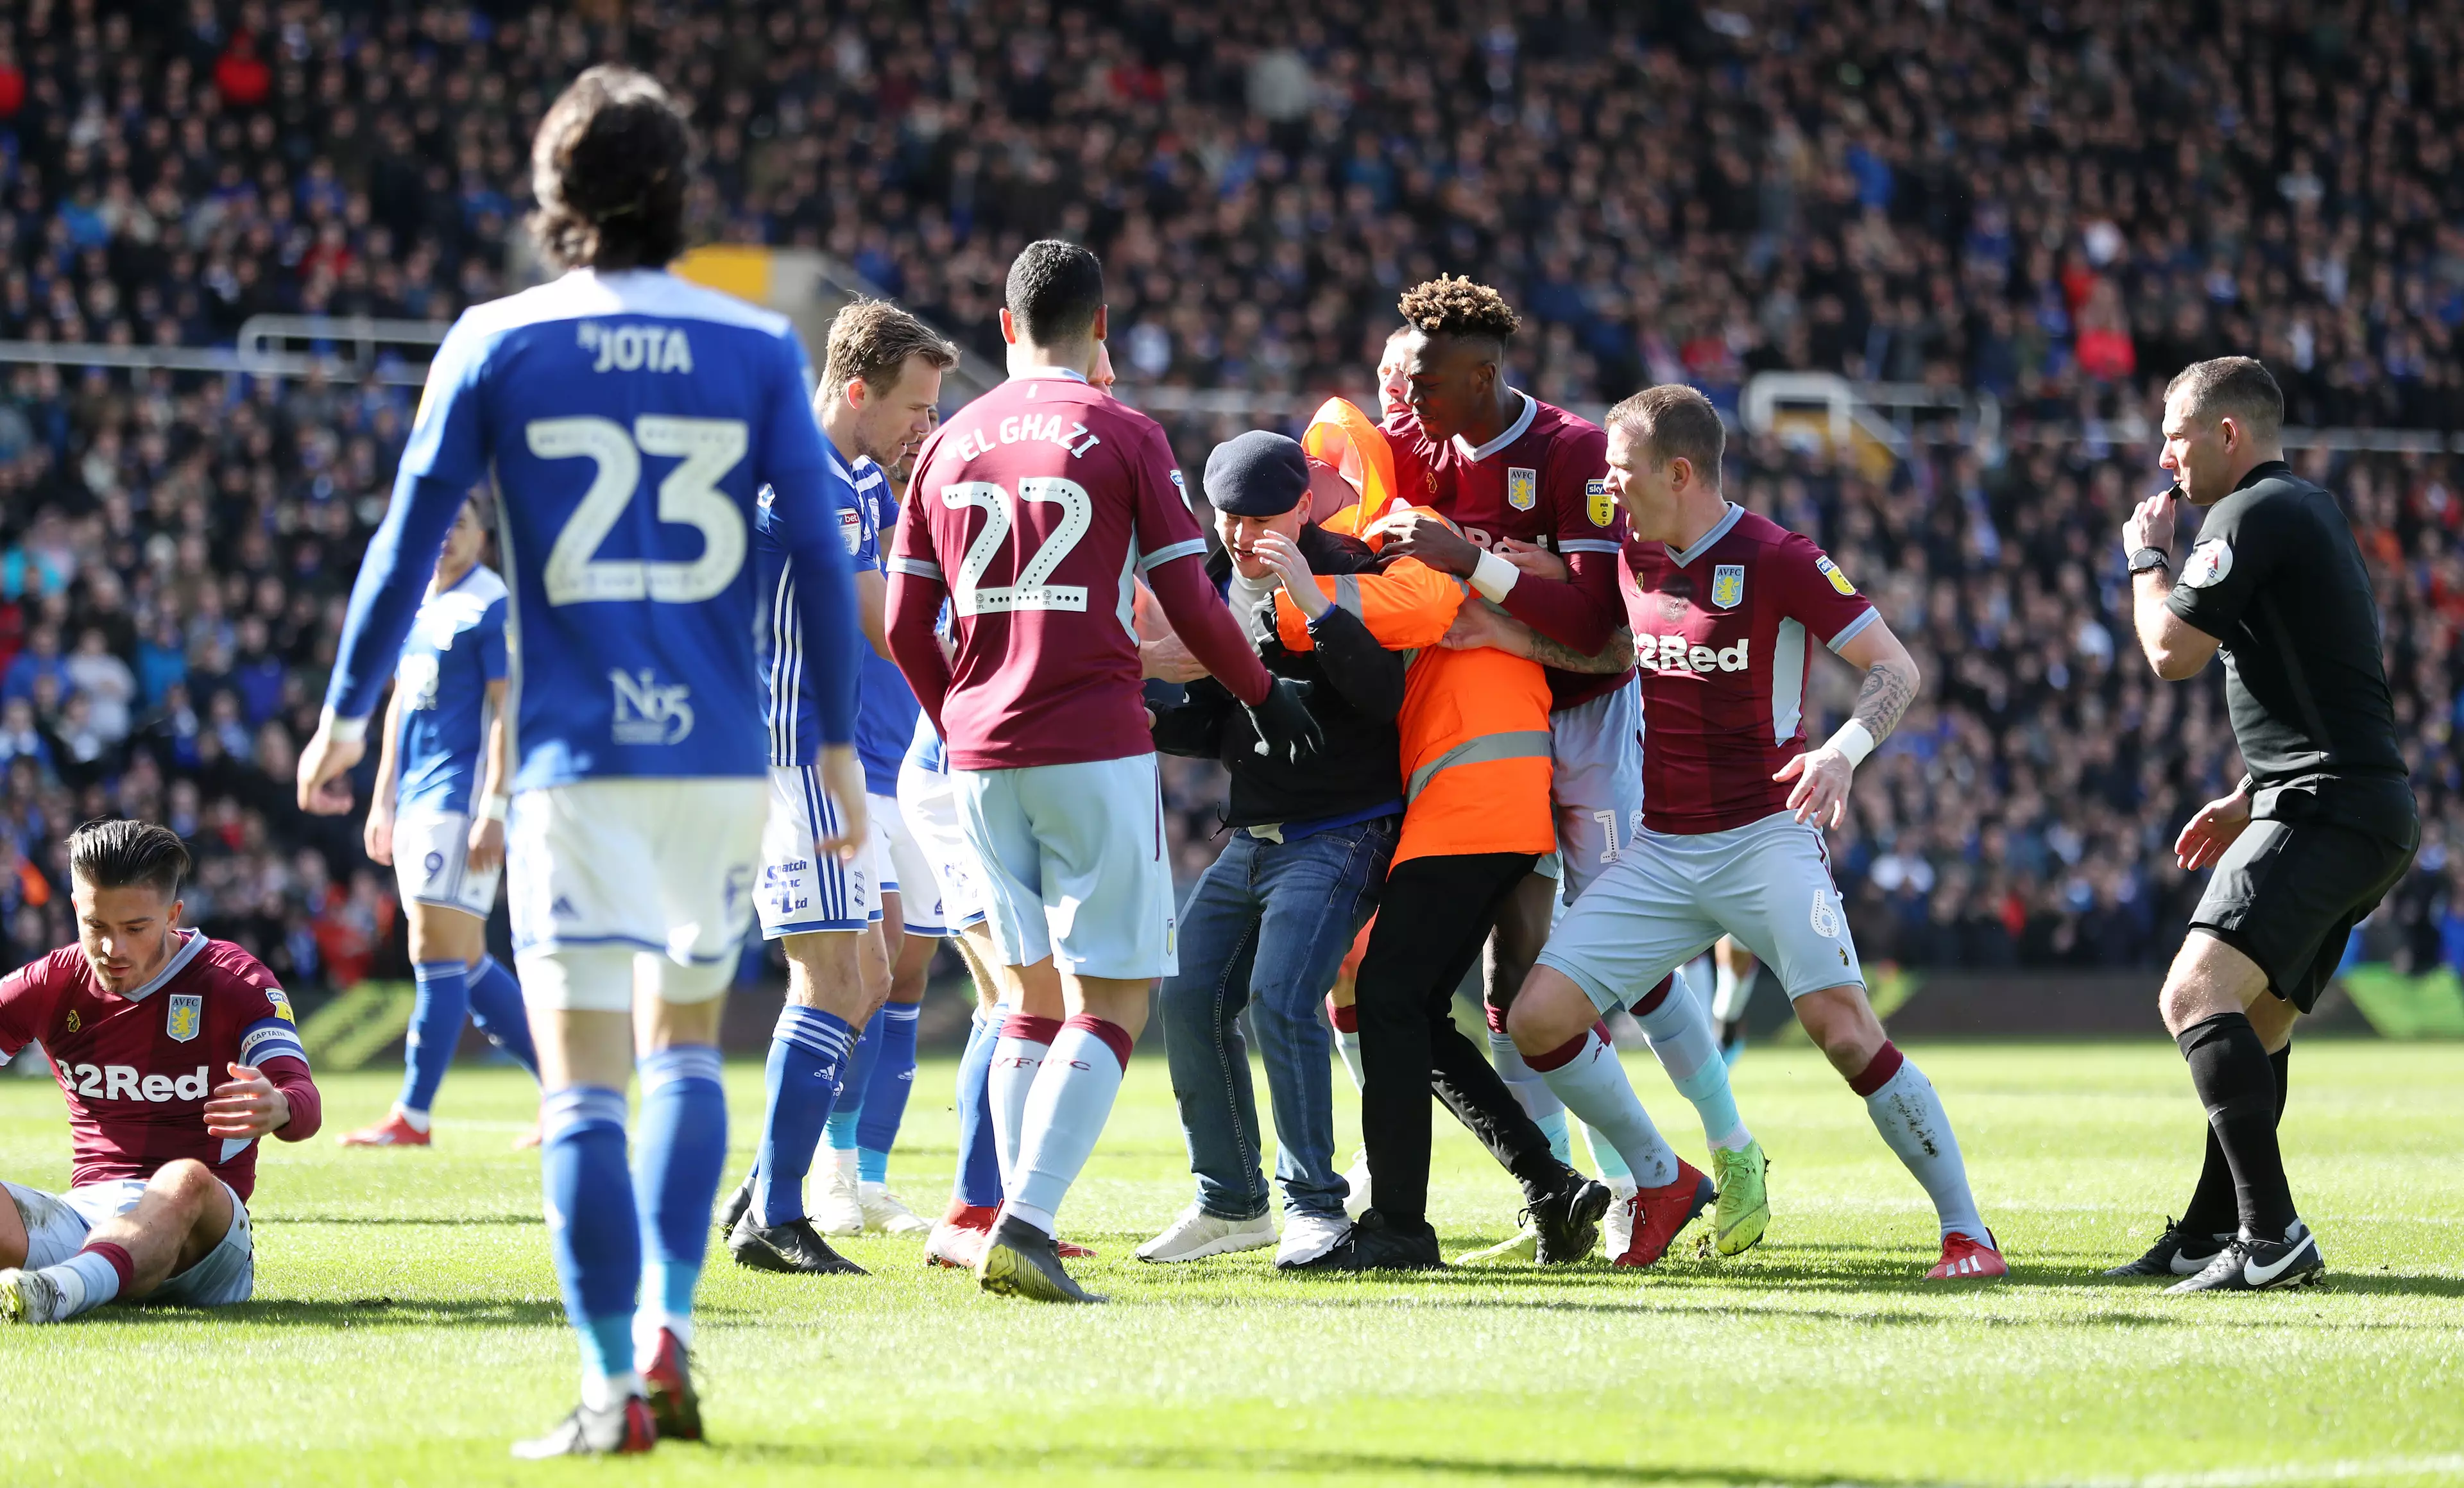 A Birmingham fan recently attacked Jack Grealish during the game against Aston Villa. Image: PA Images